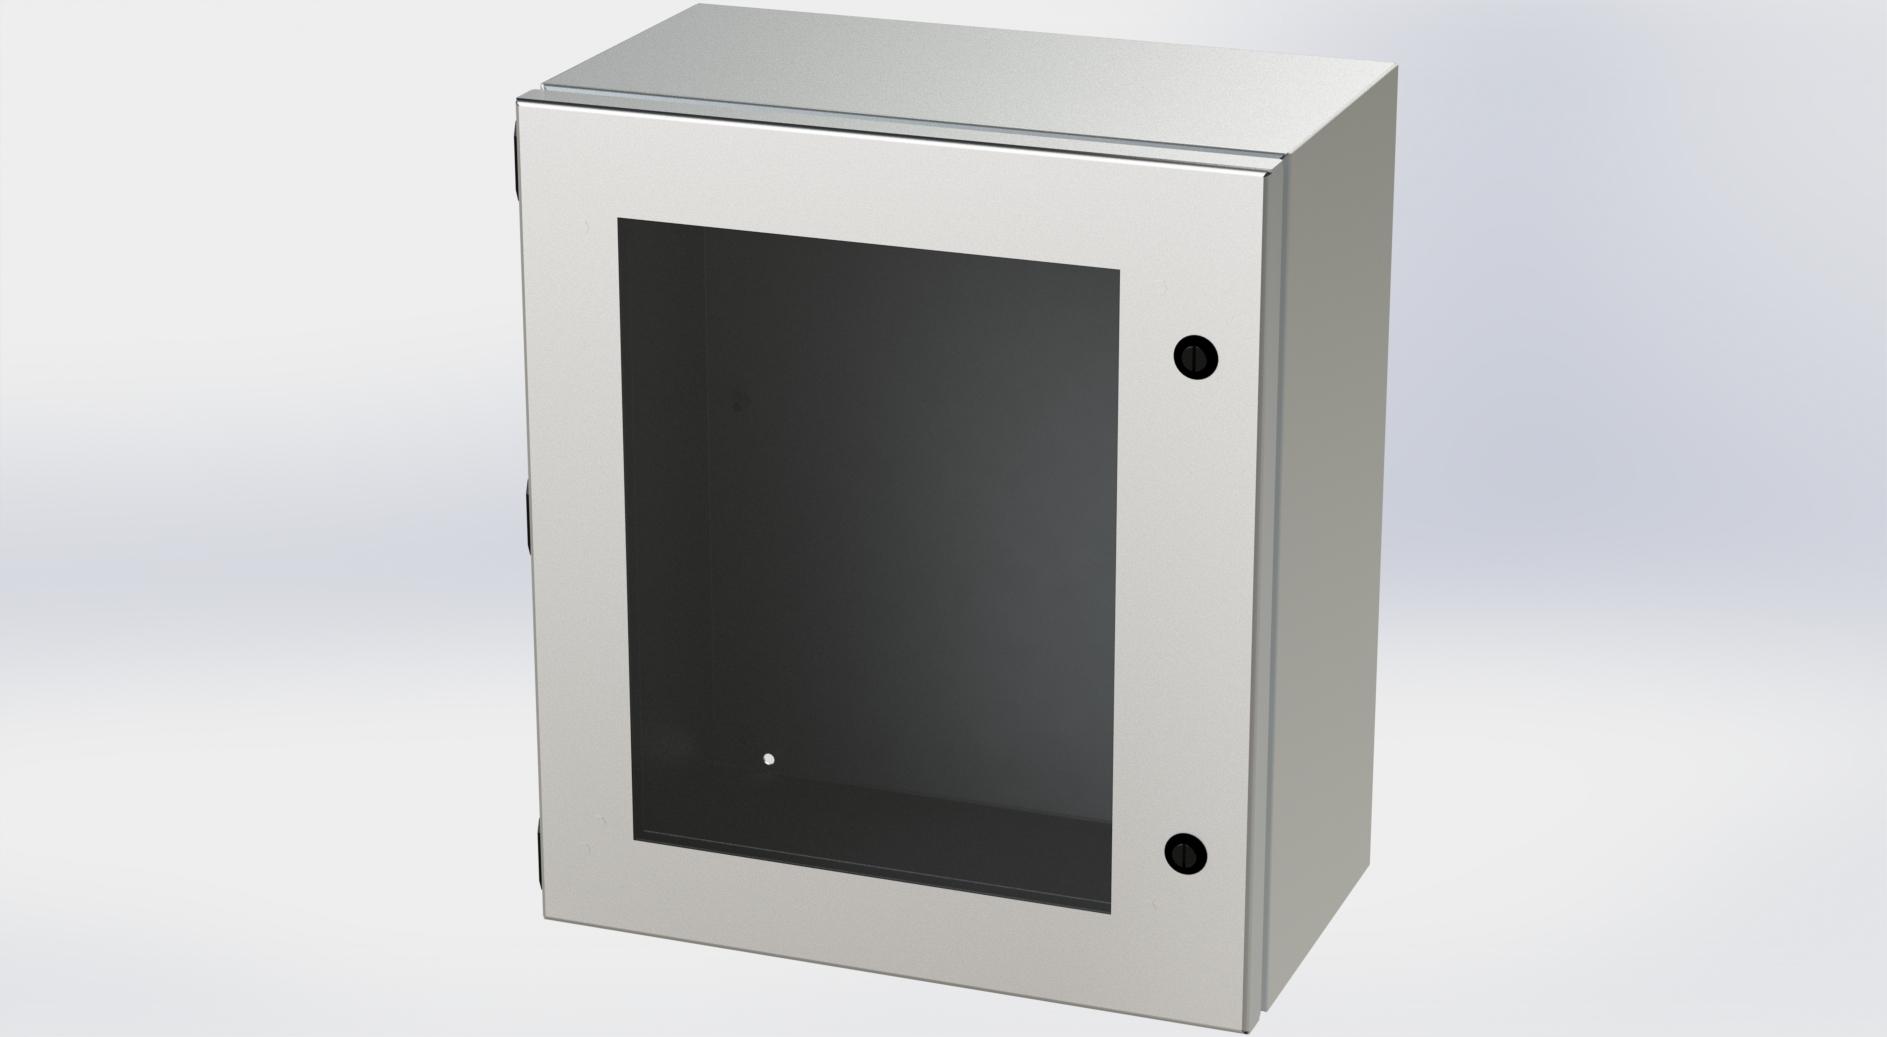 Saginaw Control SCE-16148ELJWSS S.S. ELJ Enclosure W/Viewing Window, Height:16.00", Width:14.00", Depth:8.00", #4 brushed finish on all exterior surfaces. Optional sub-panels are powder coated white.